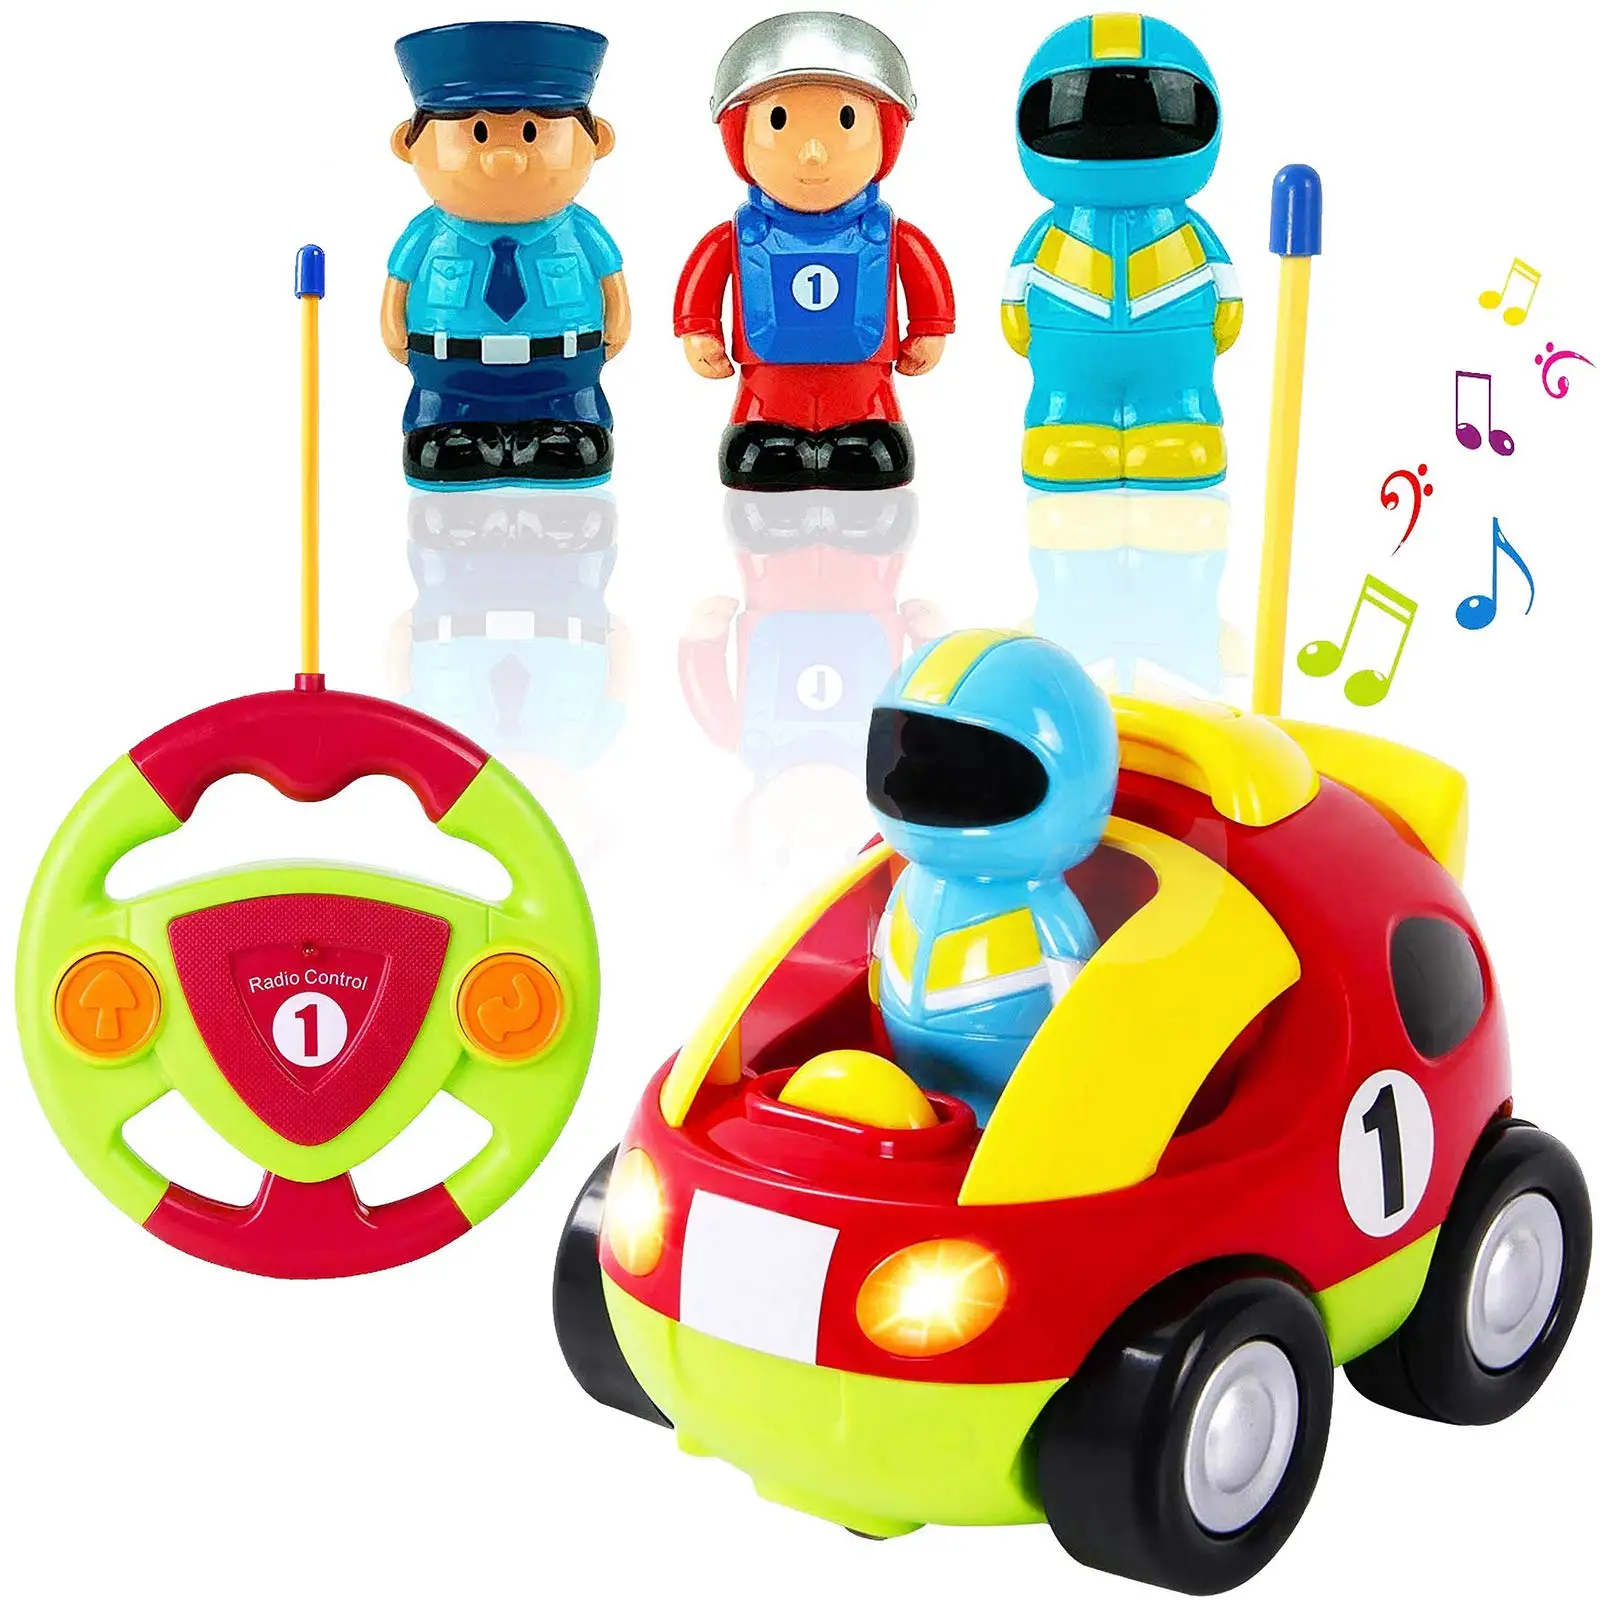 Kids New Cartoon R/C Police Car Radio Control Toy For Toddlers Toddler Gift Play 